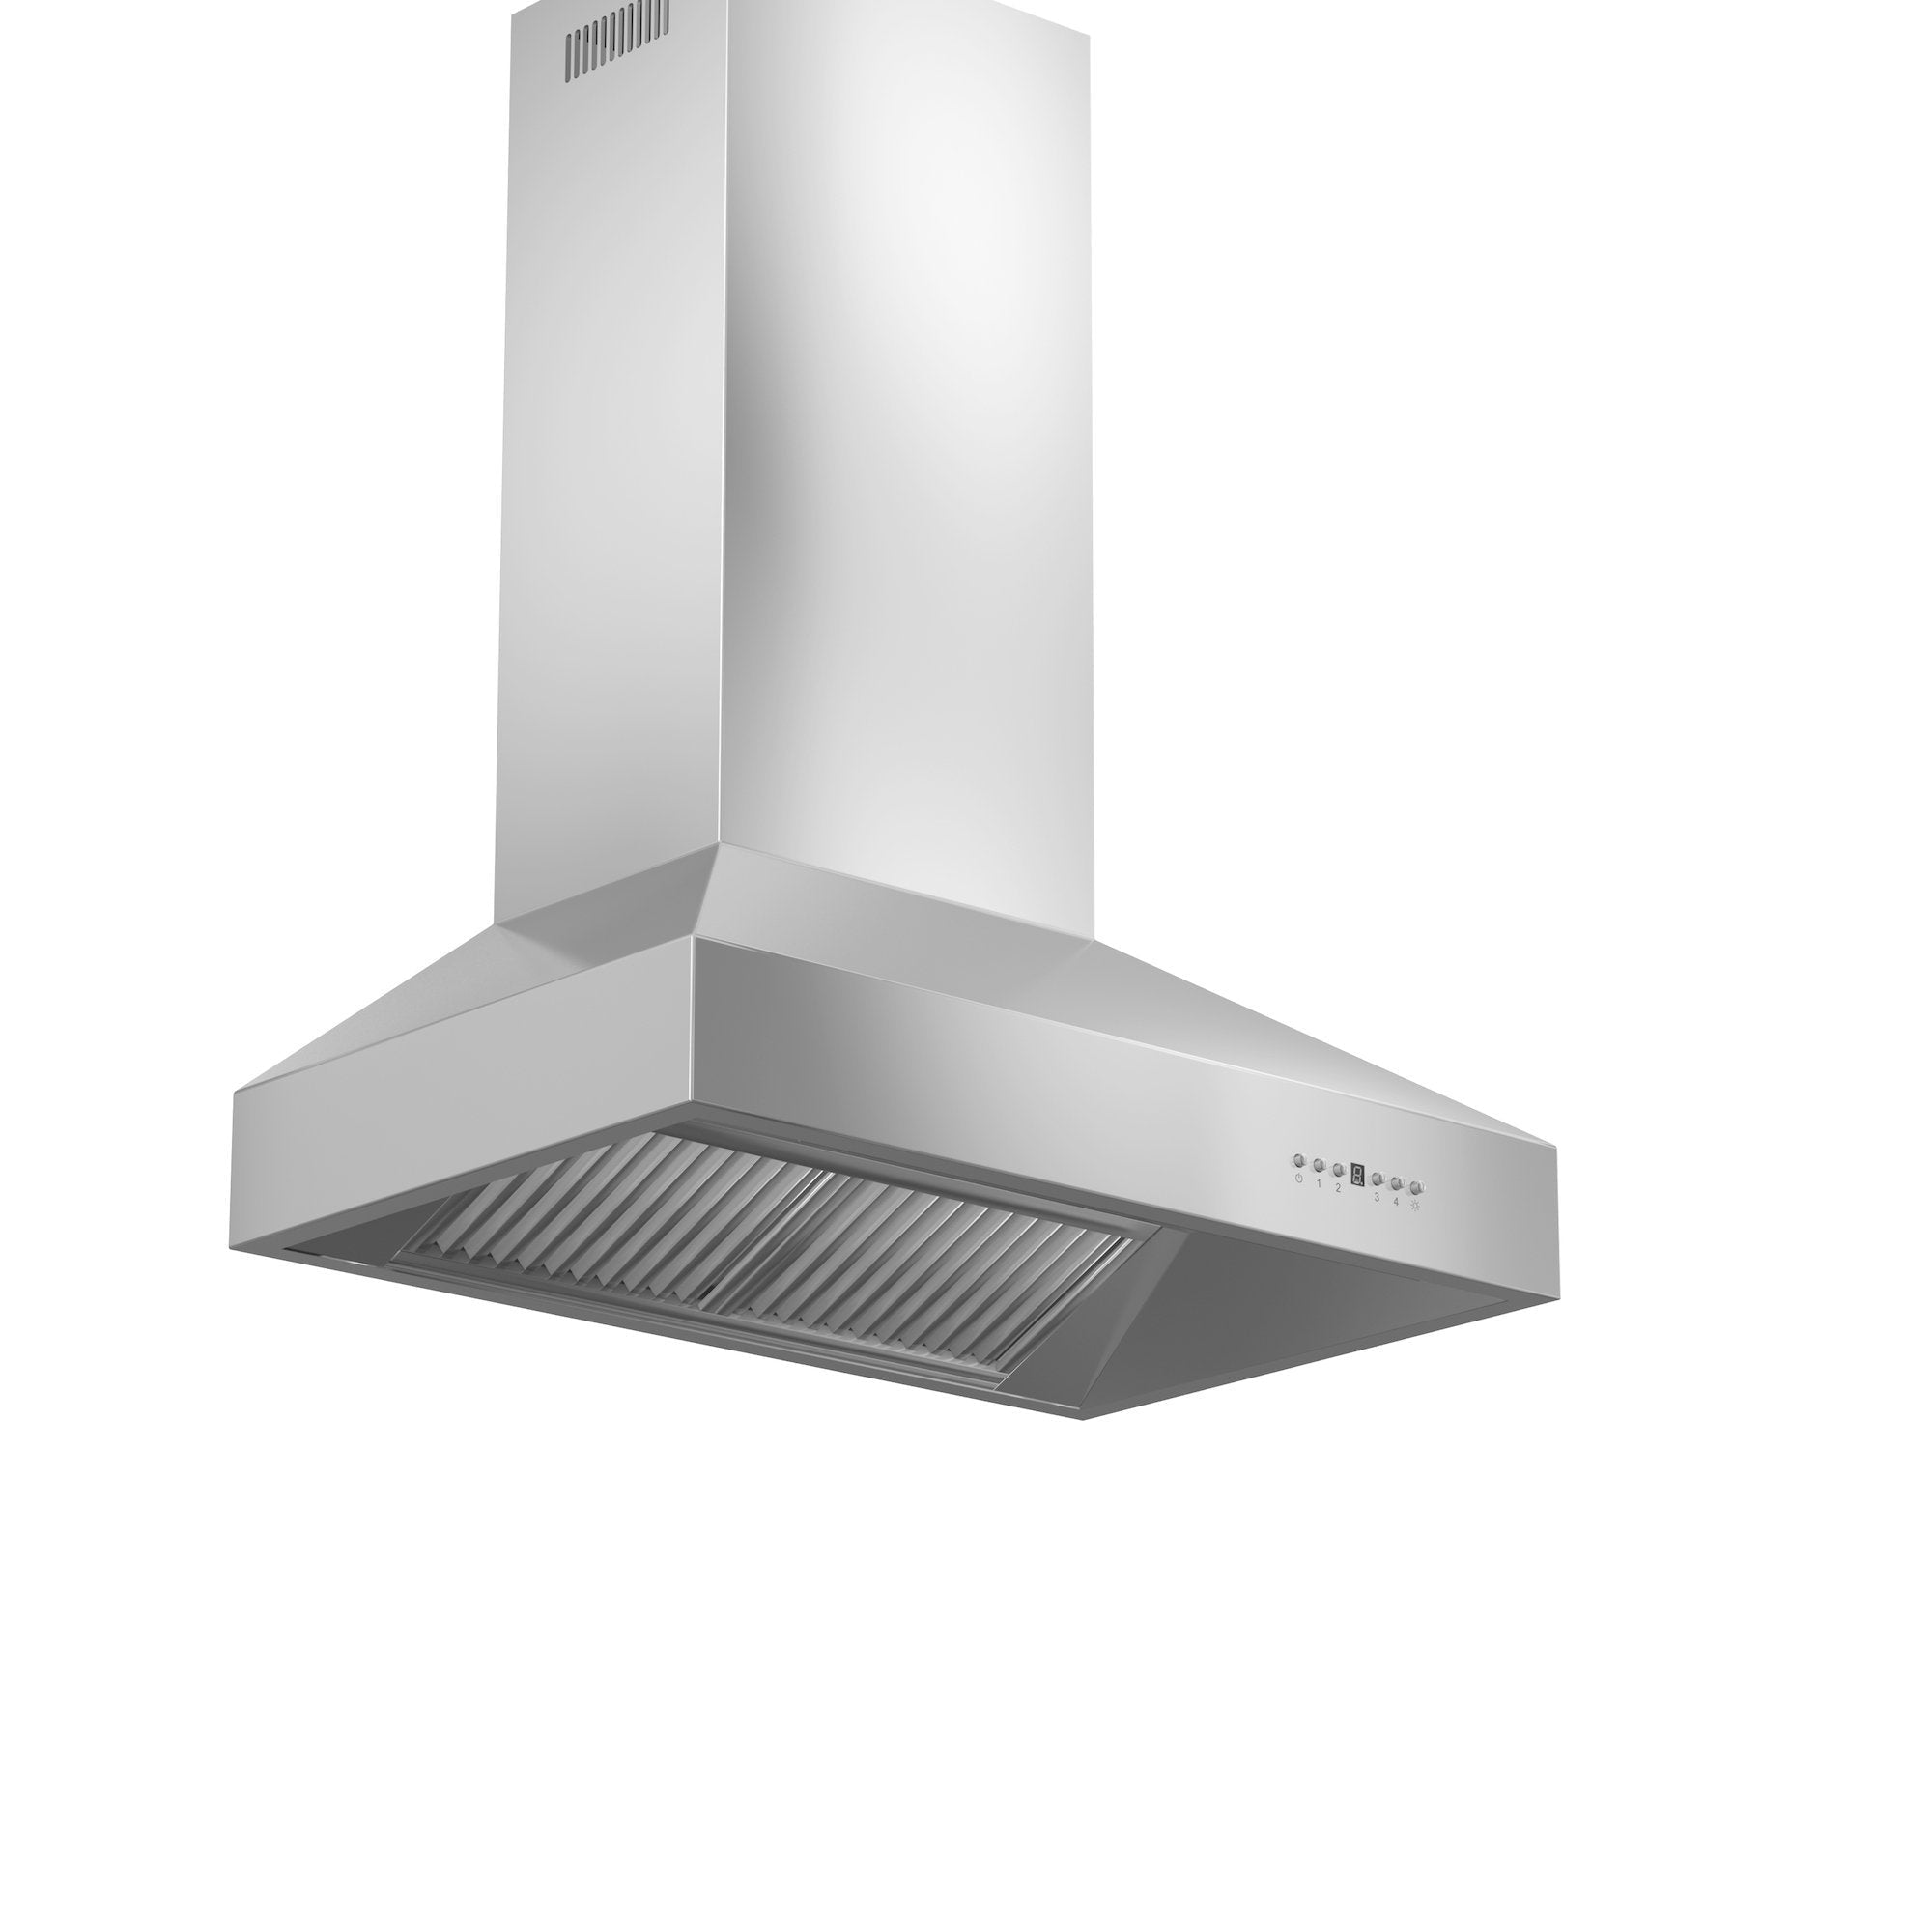 ZLINE Professional Convertible Vent Wall Mount Range Hood in Stainless Steel with Crown Molding (667CRN) side, below.